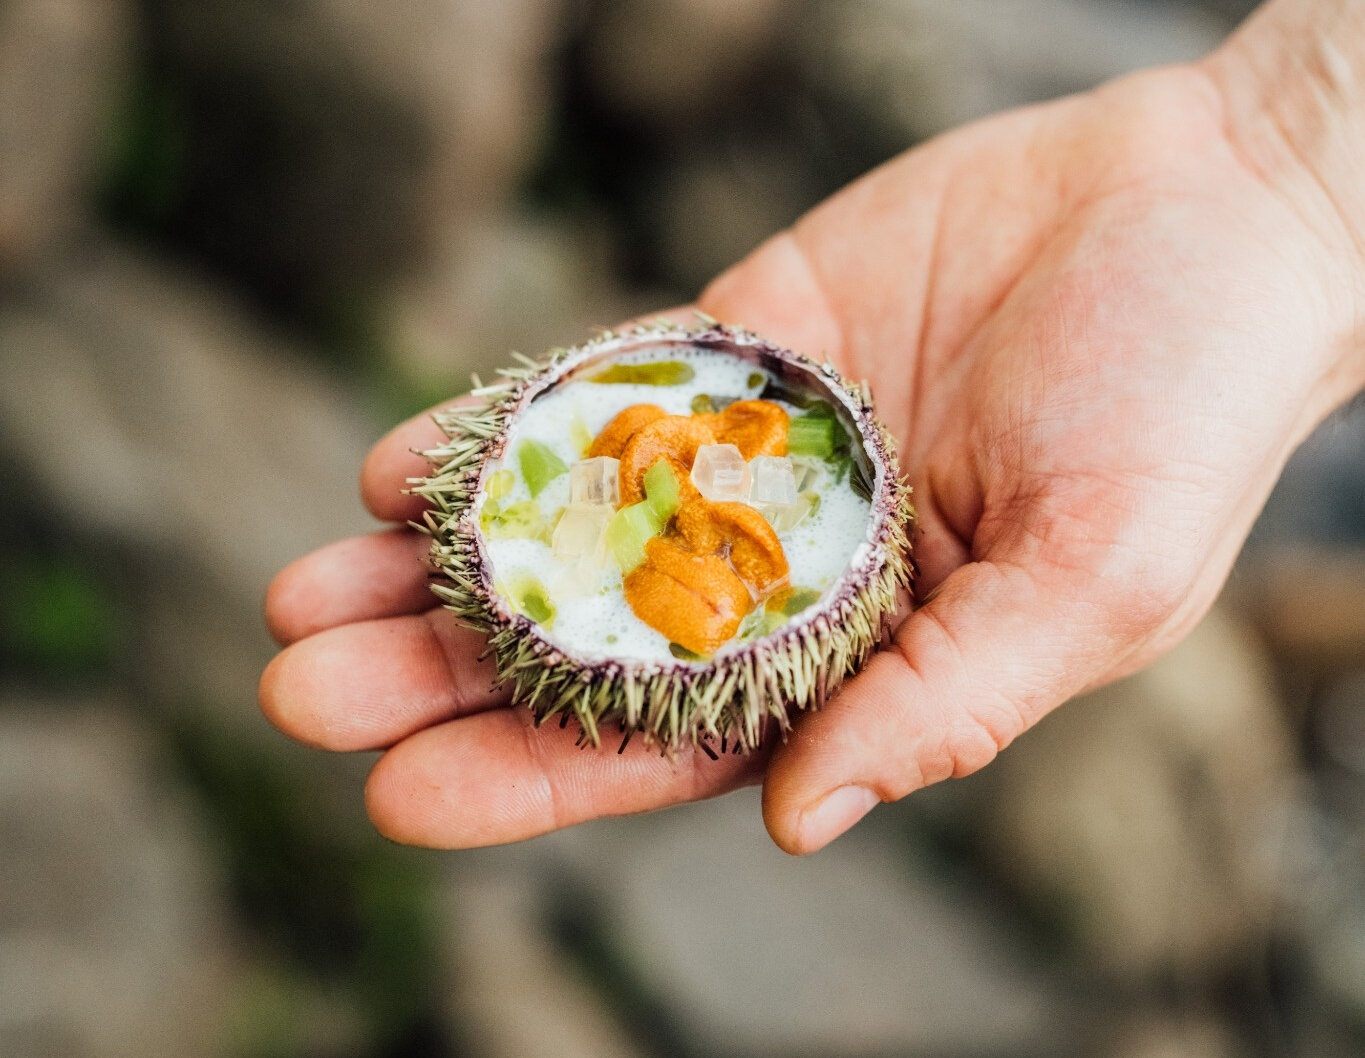 A chef shows a sea urchin in his hand